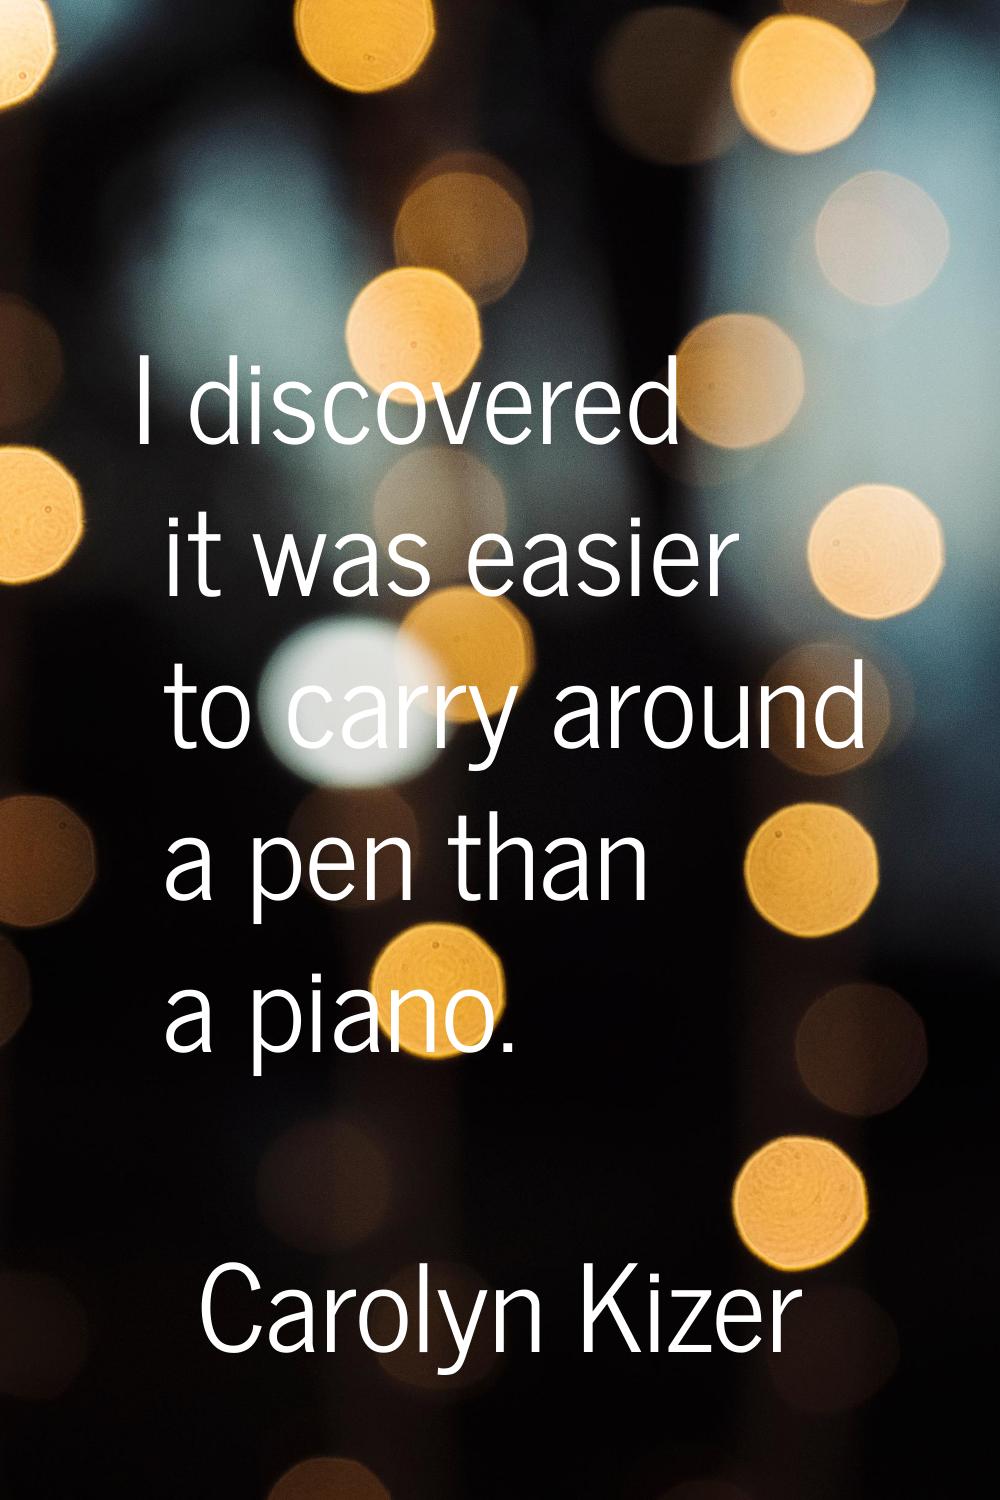 I discovered it was easier to carry around a pen than a piano.